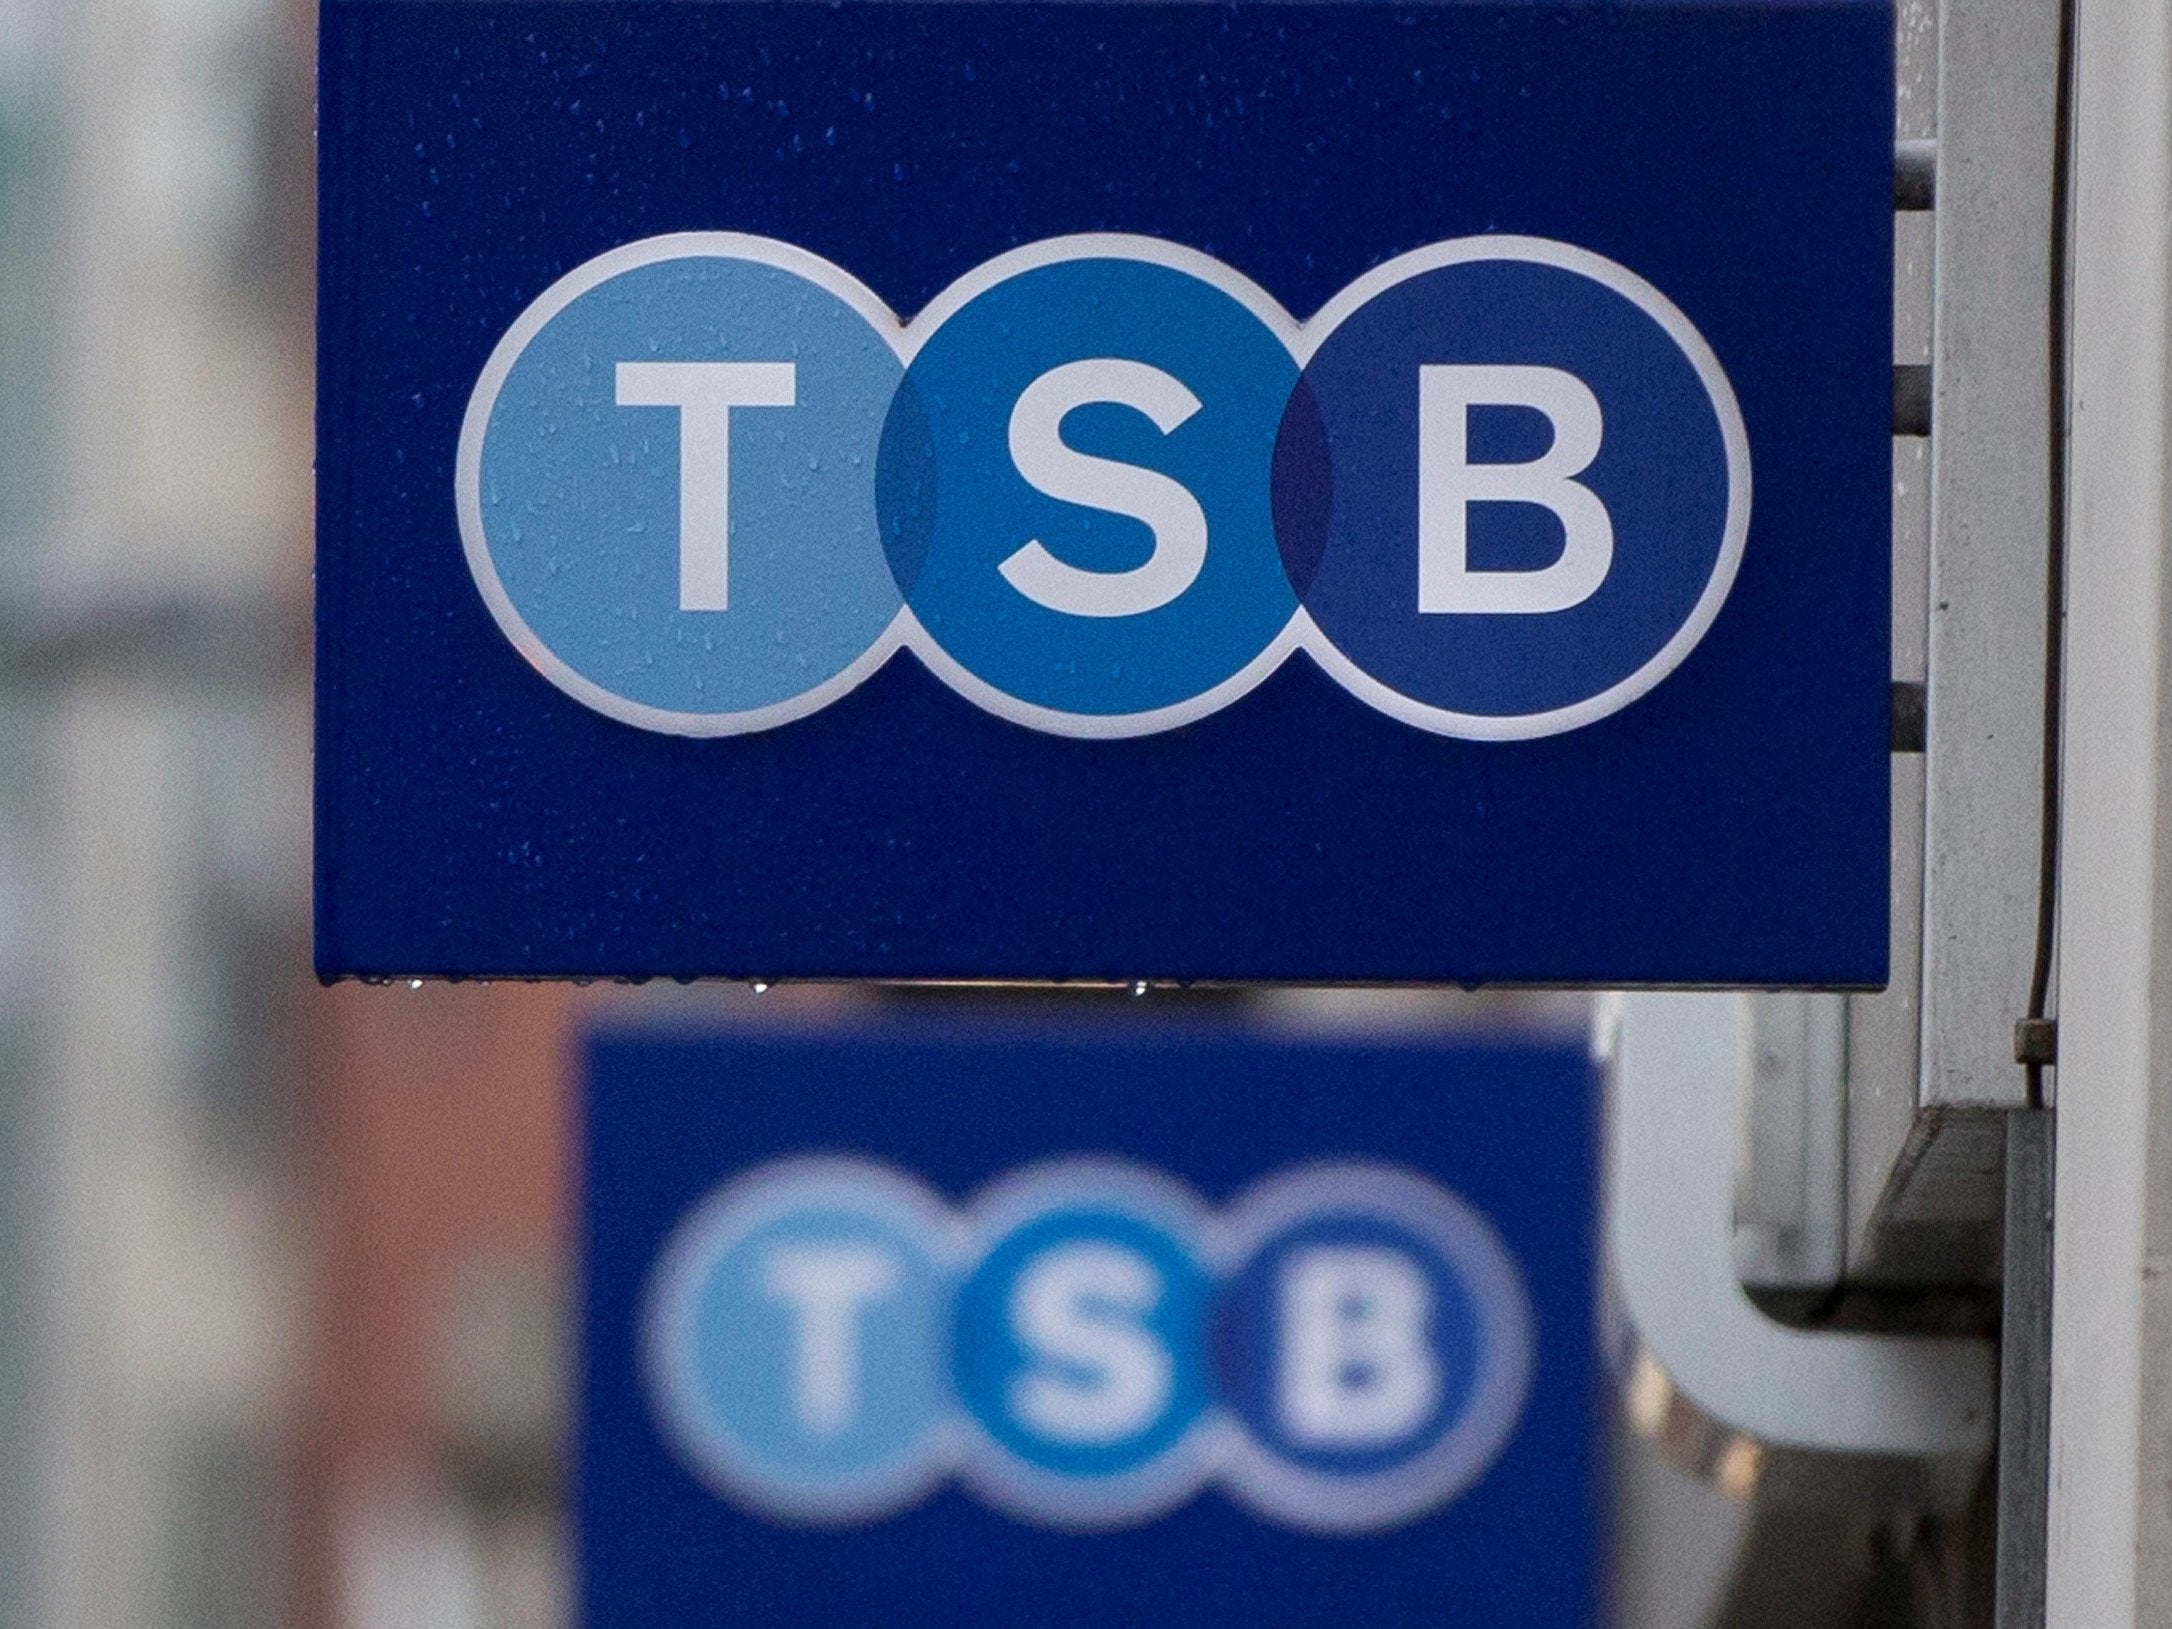 Customers rated TSB the worst UK bank after a troubled year for the lender